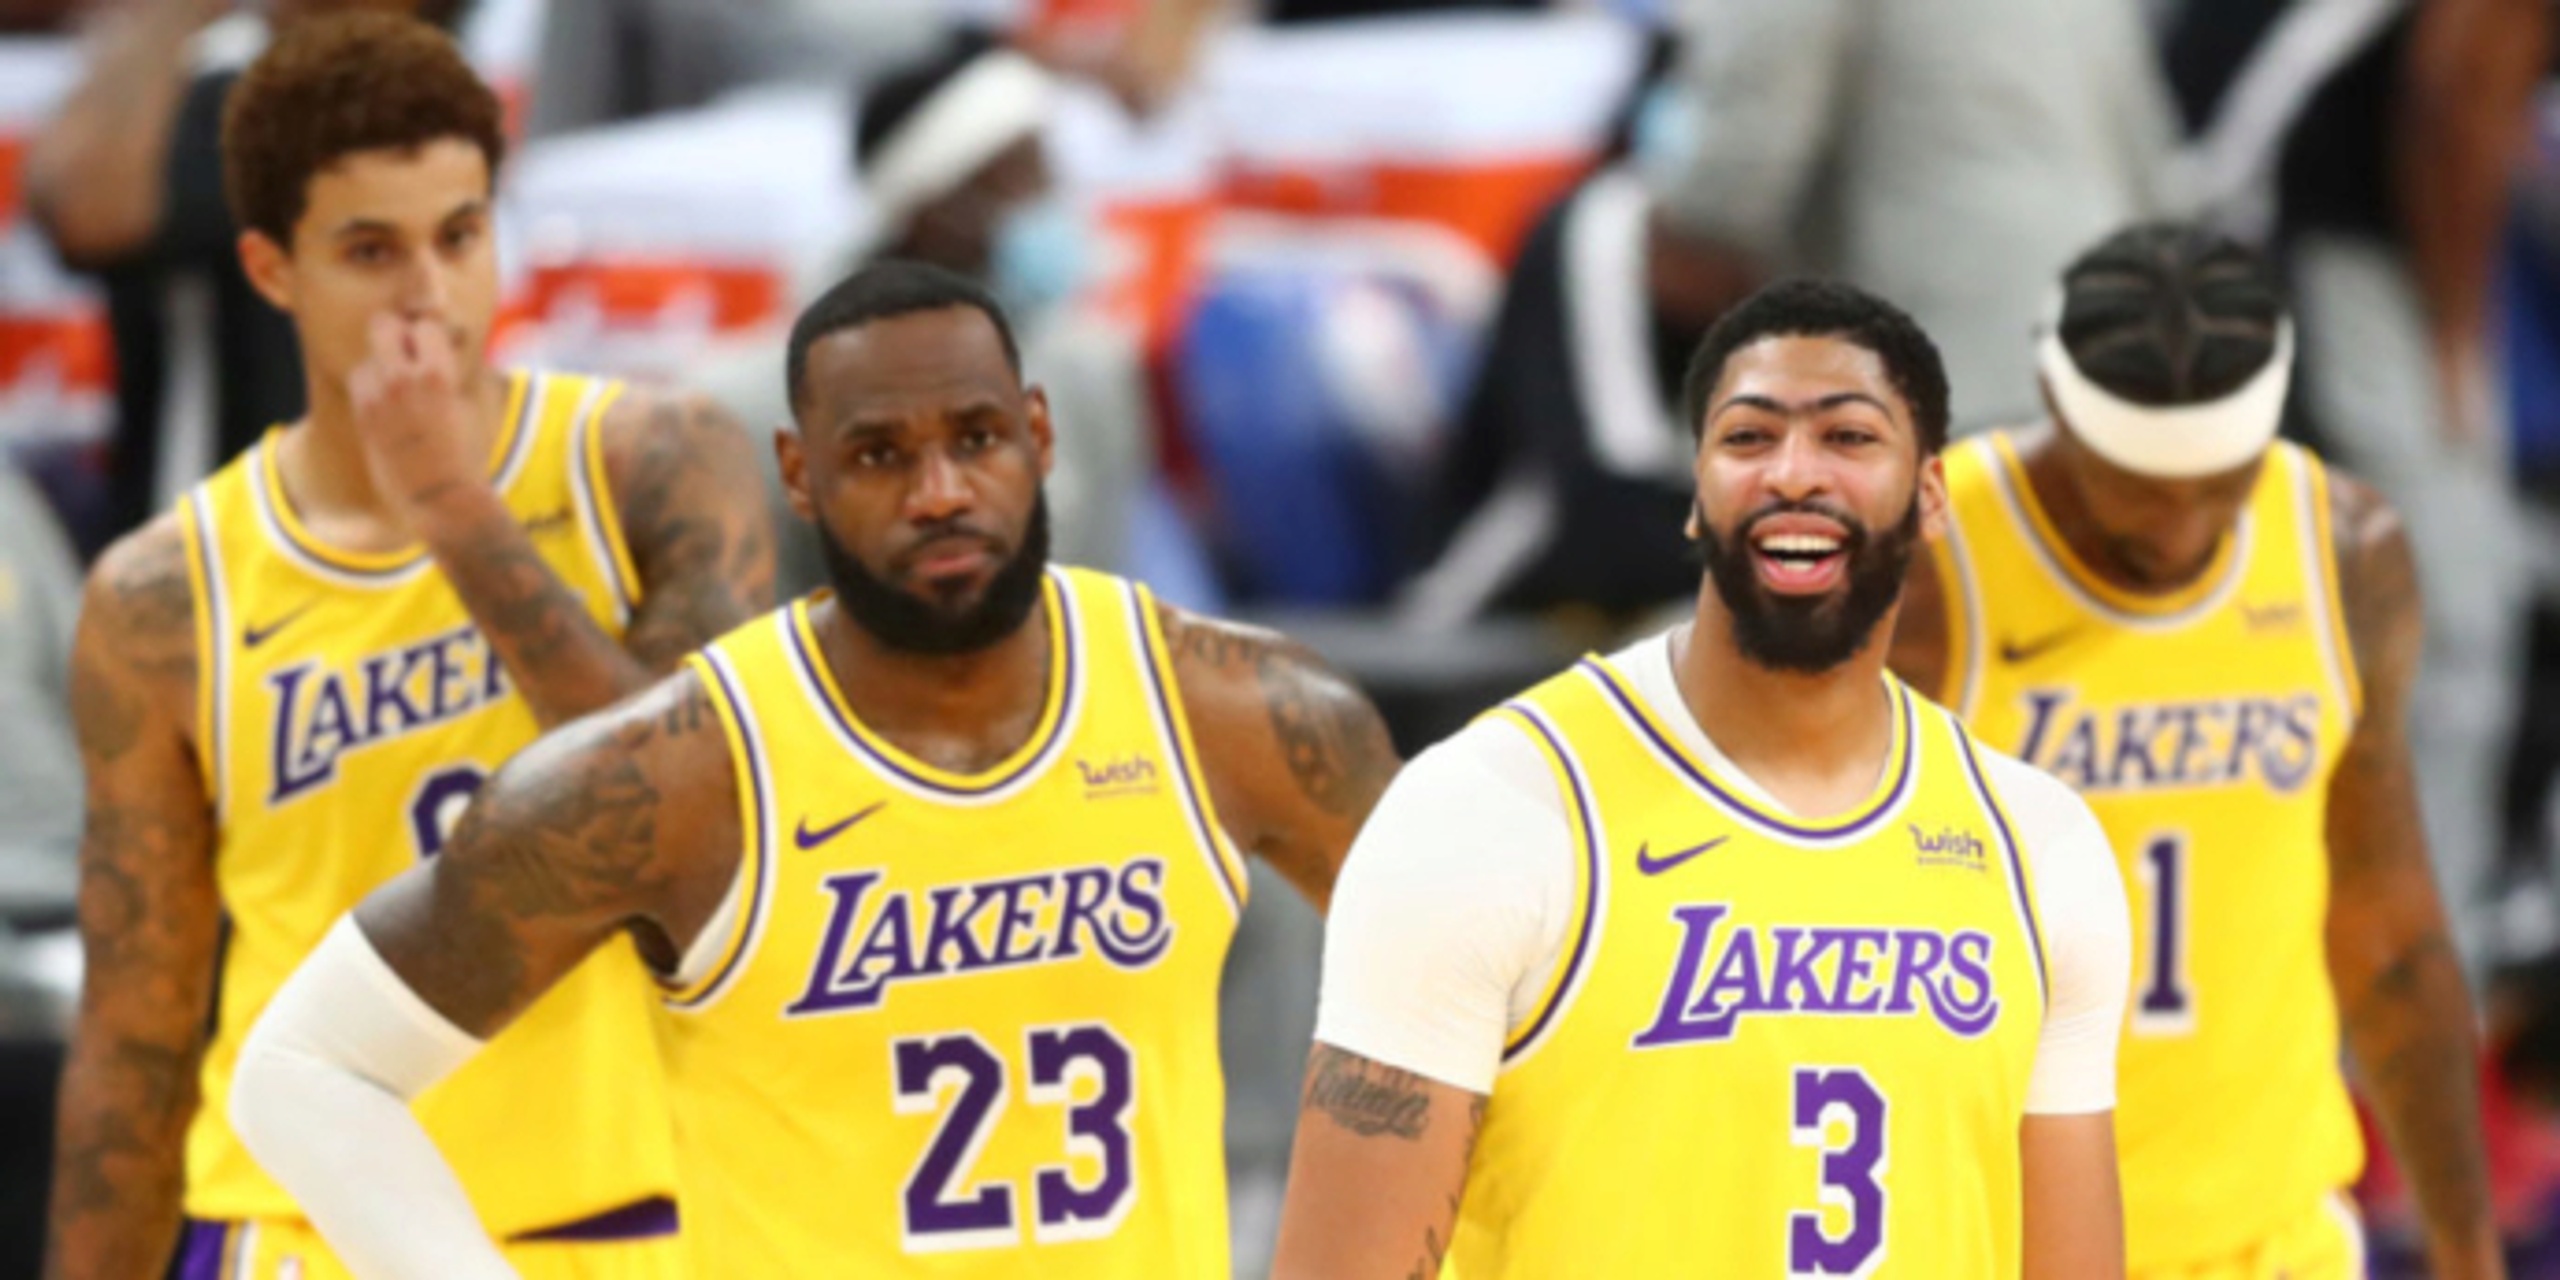 Without many assets, the Lakers face a somewhat challenging offseason